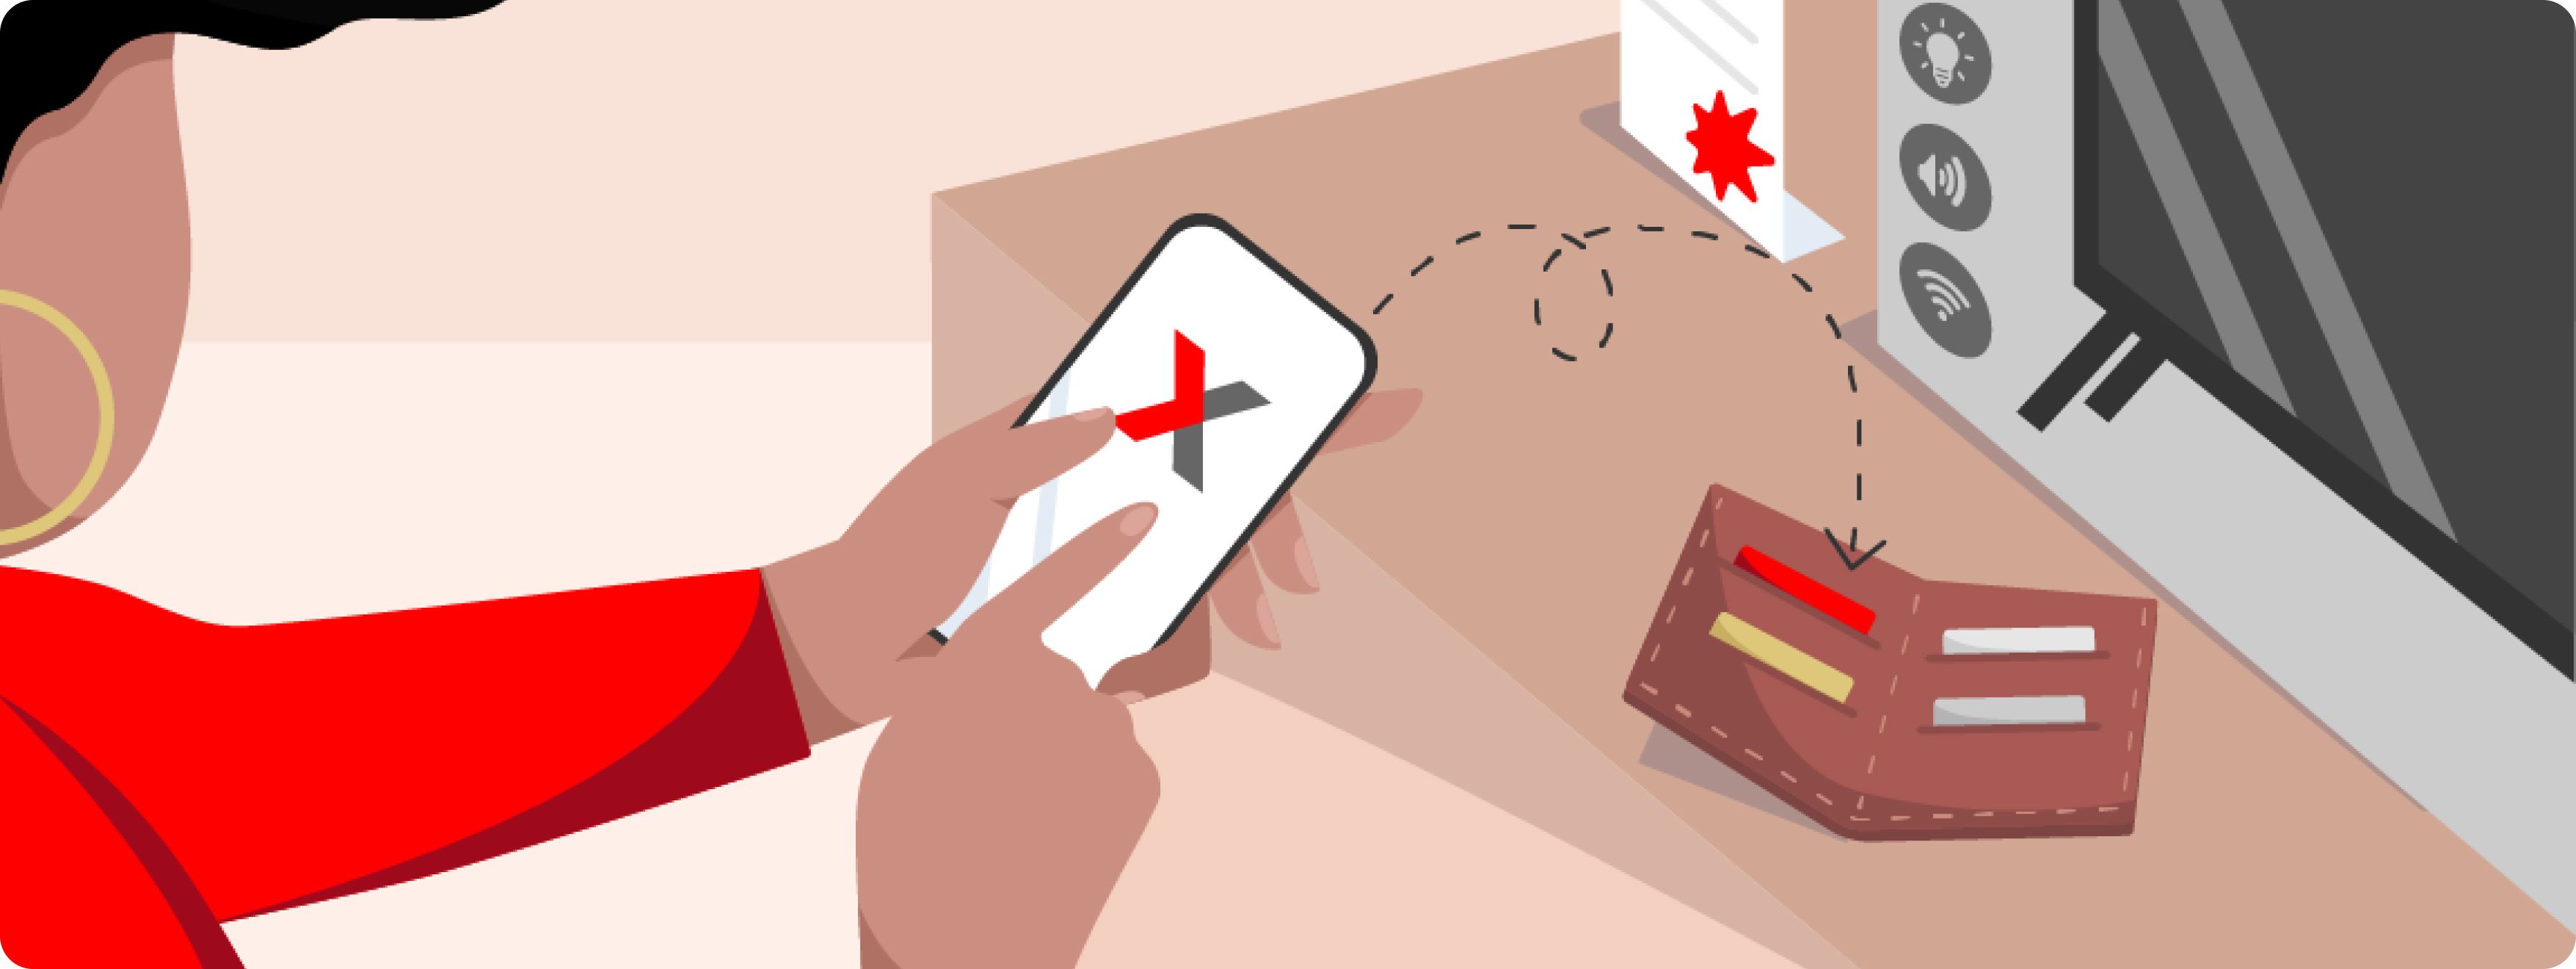 Illustration of a person holding a smartphone. A table with a wallet in the background and and arrow pointing from the phone to a card in the wallet.